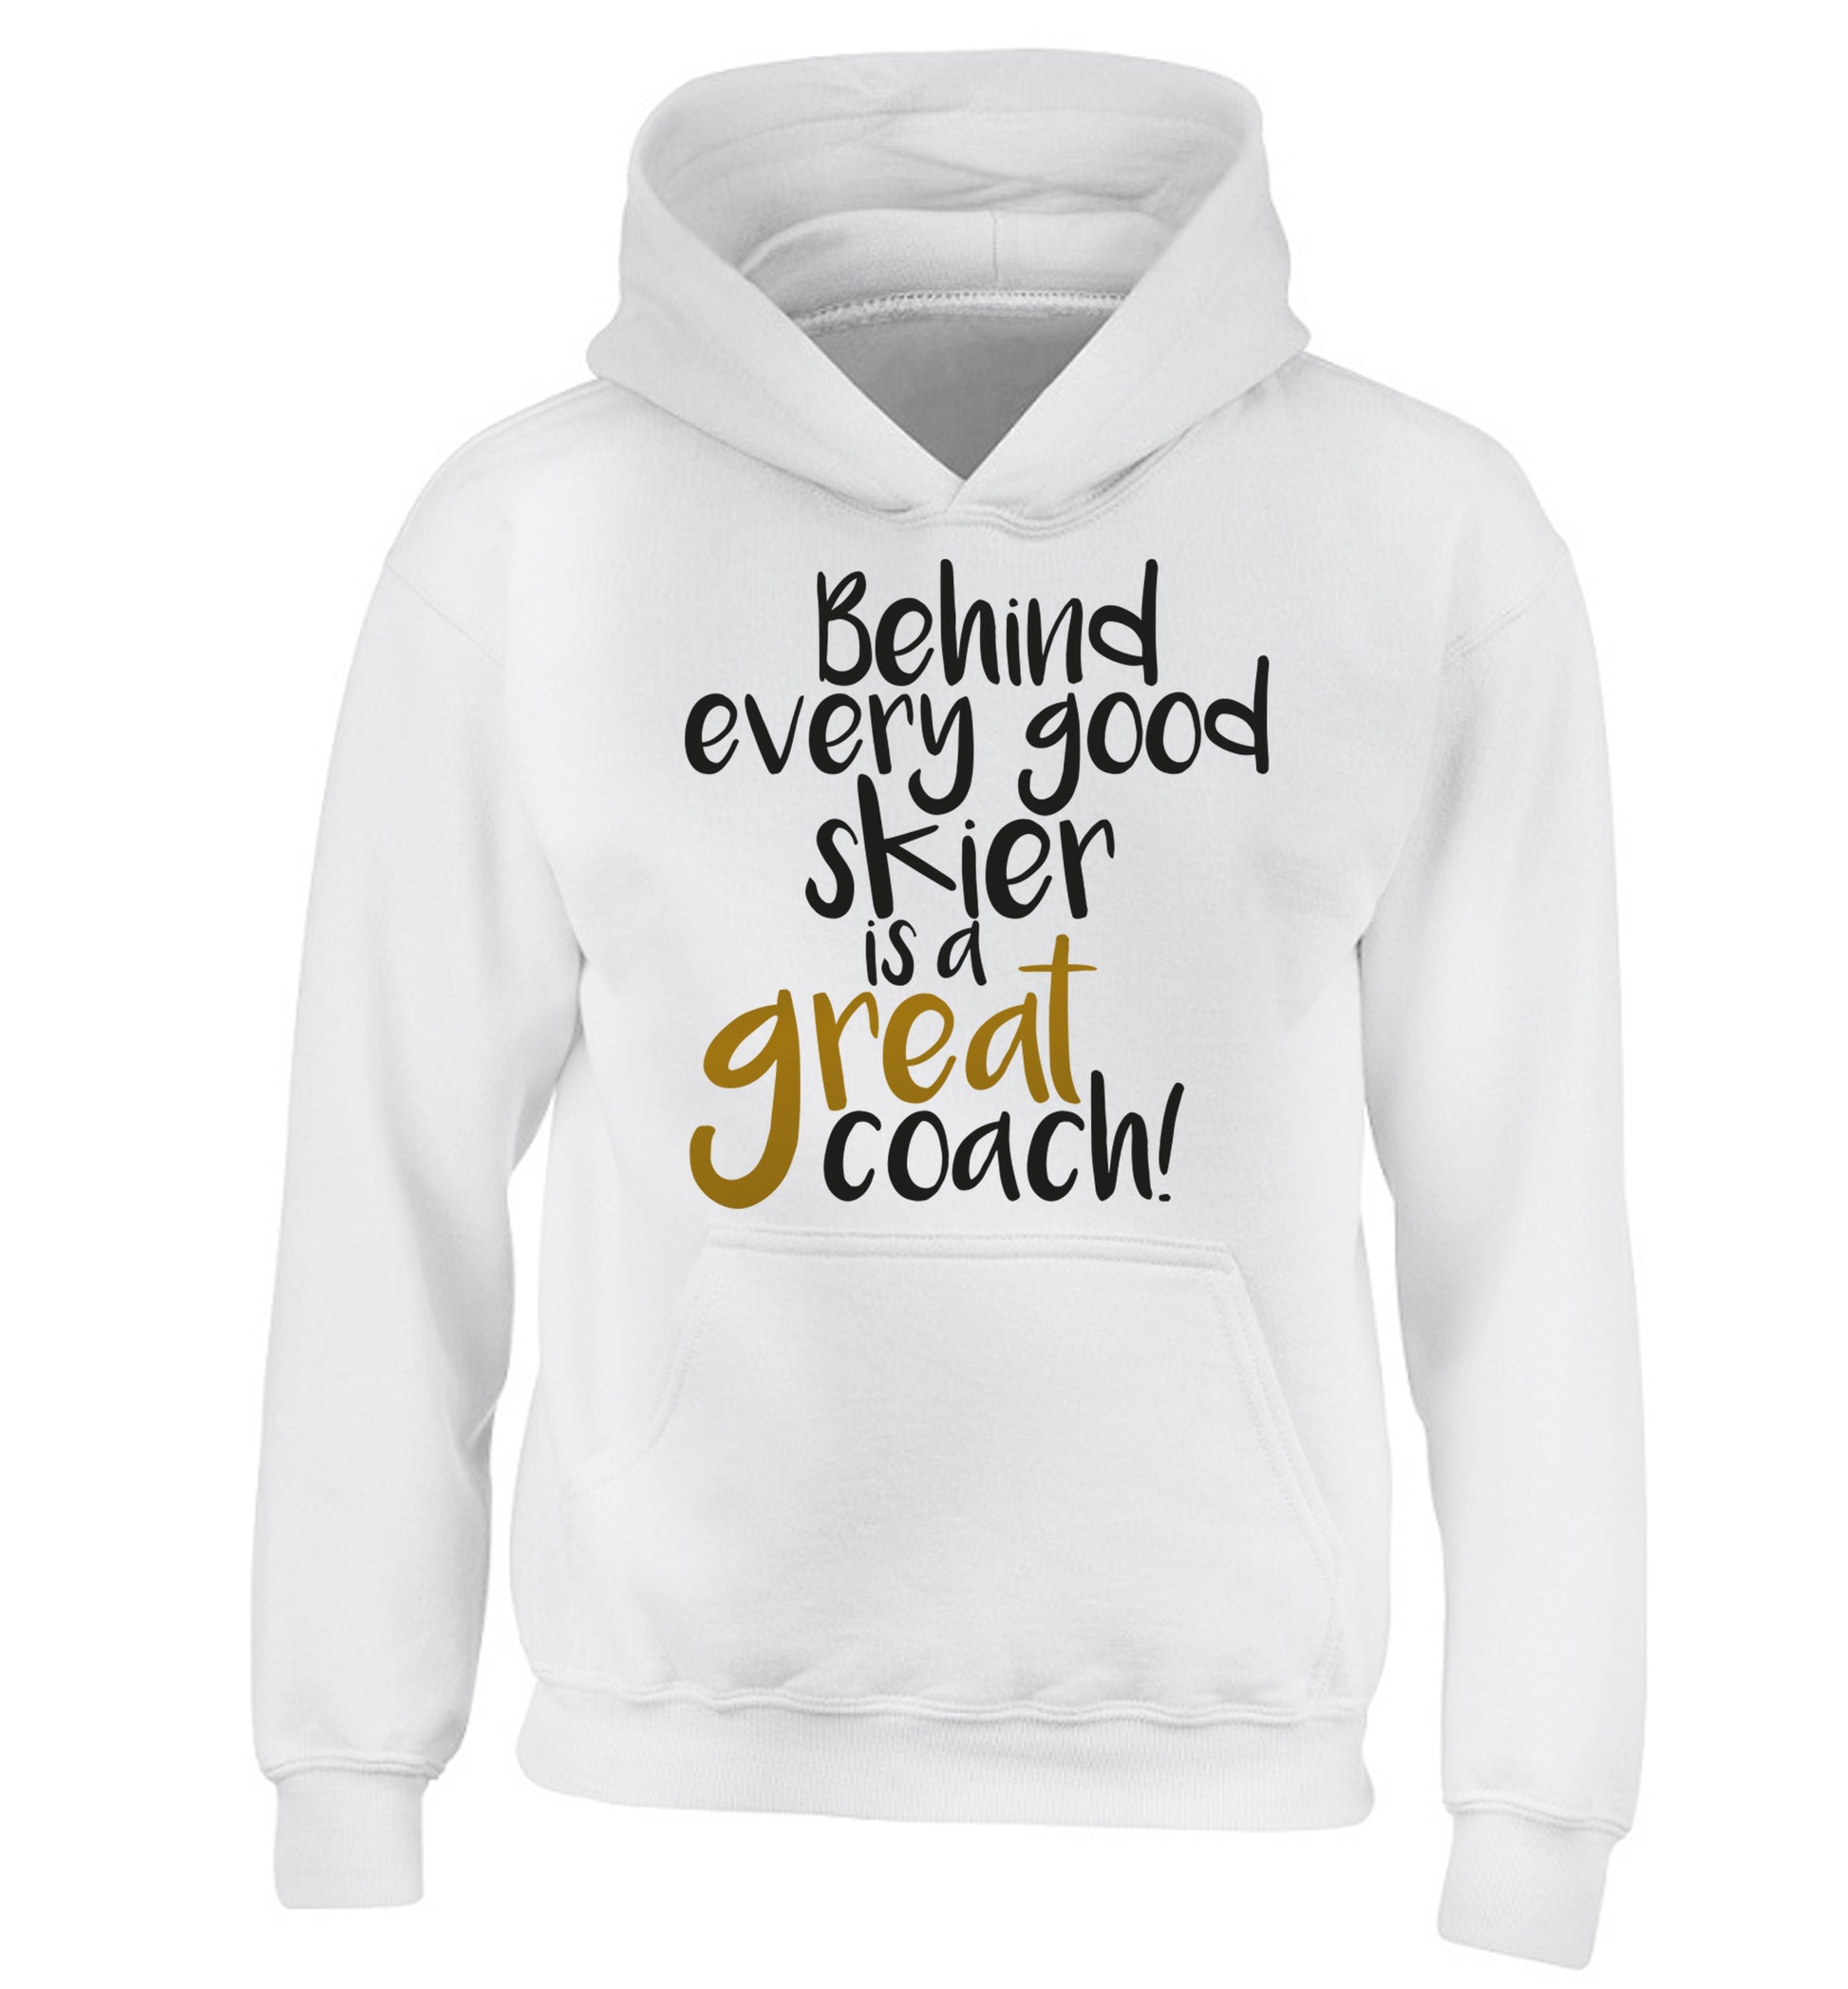 Behind every good skier is a great coach! children's white hoodie 12-14 Years